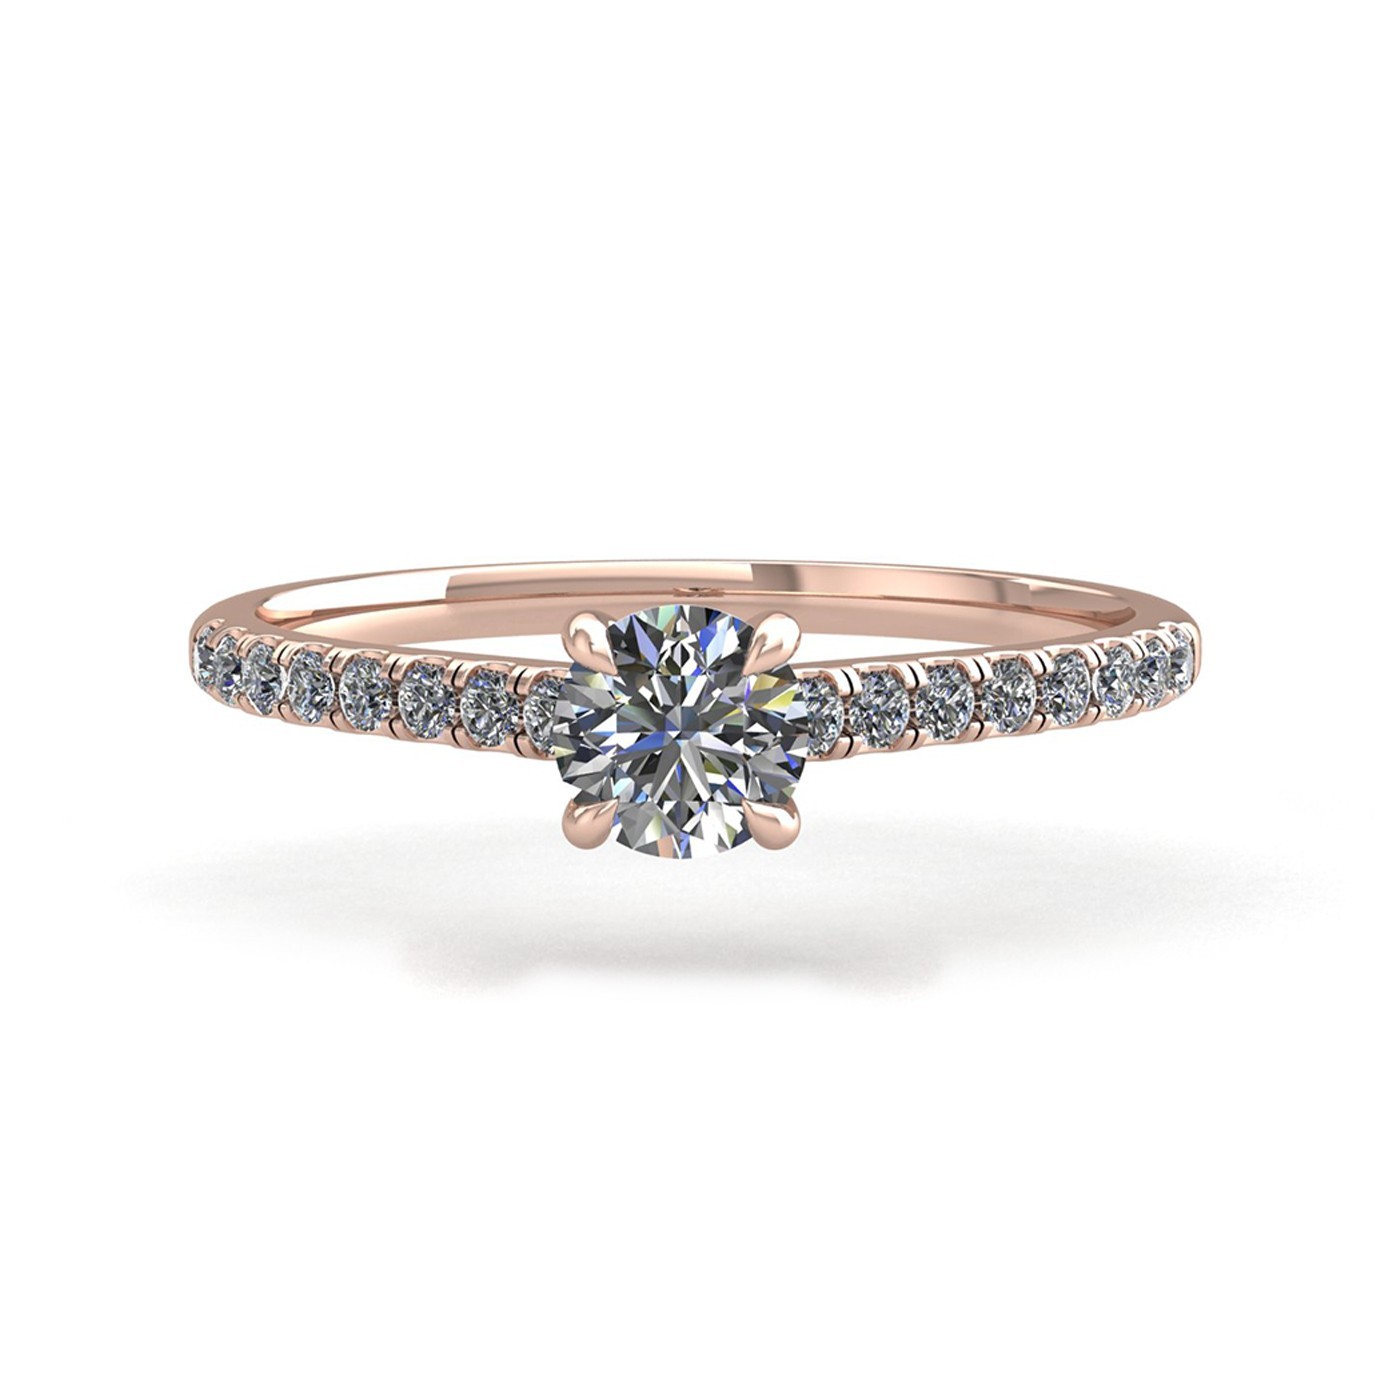 18k rose gold 1.5ct 4 prongs round cut diamond engagement ring with whisper thin pavÉ set band Photos & images